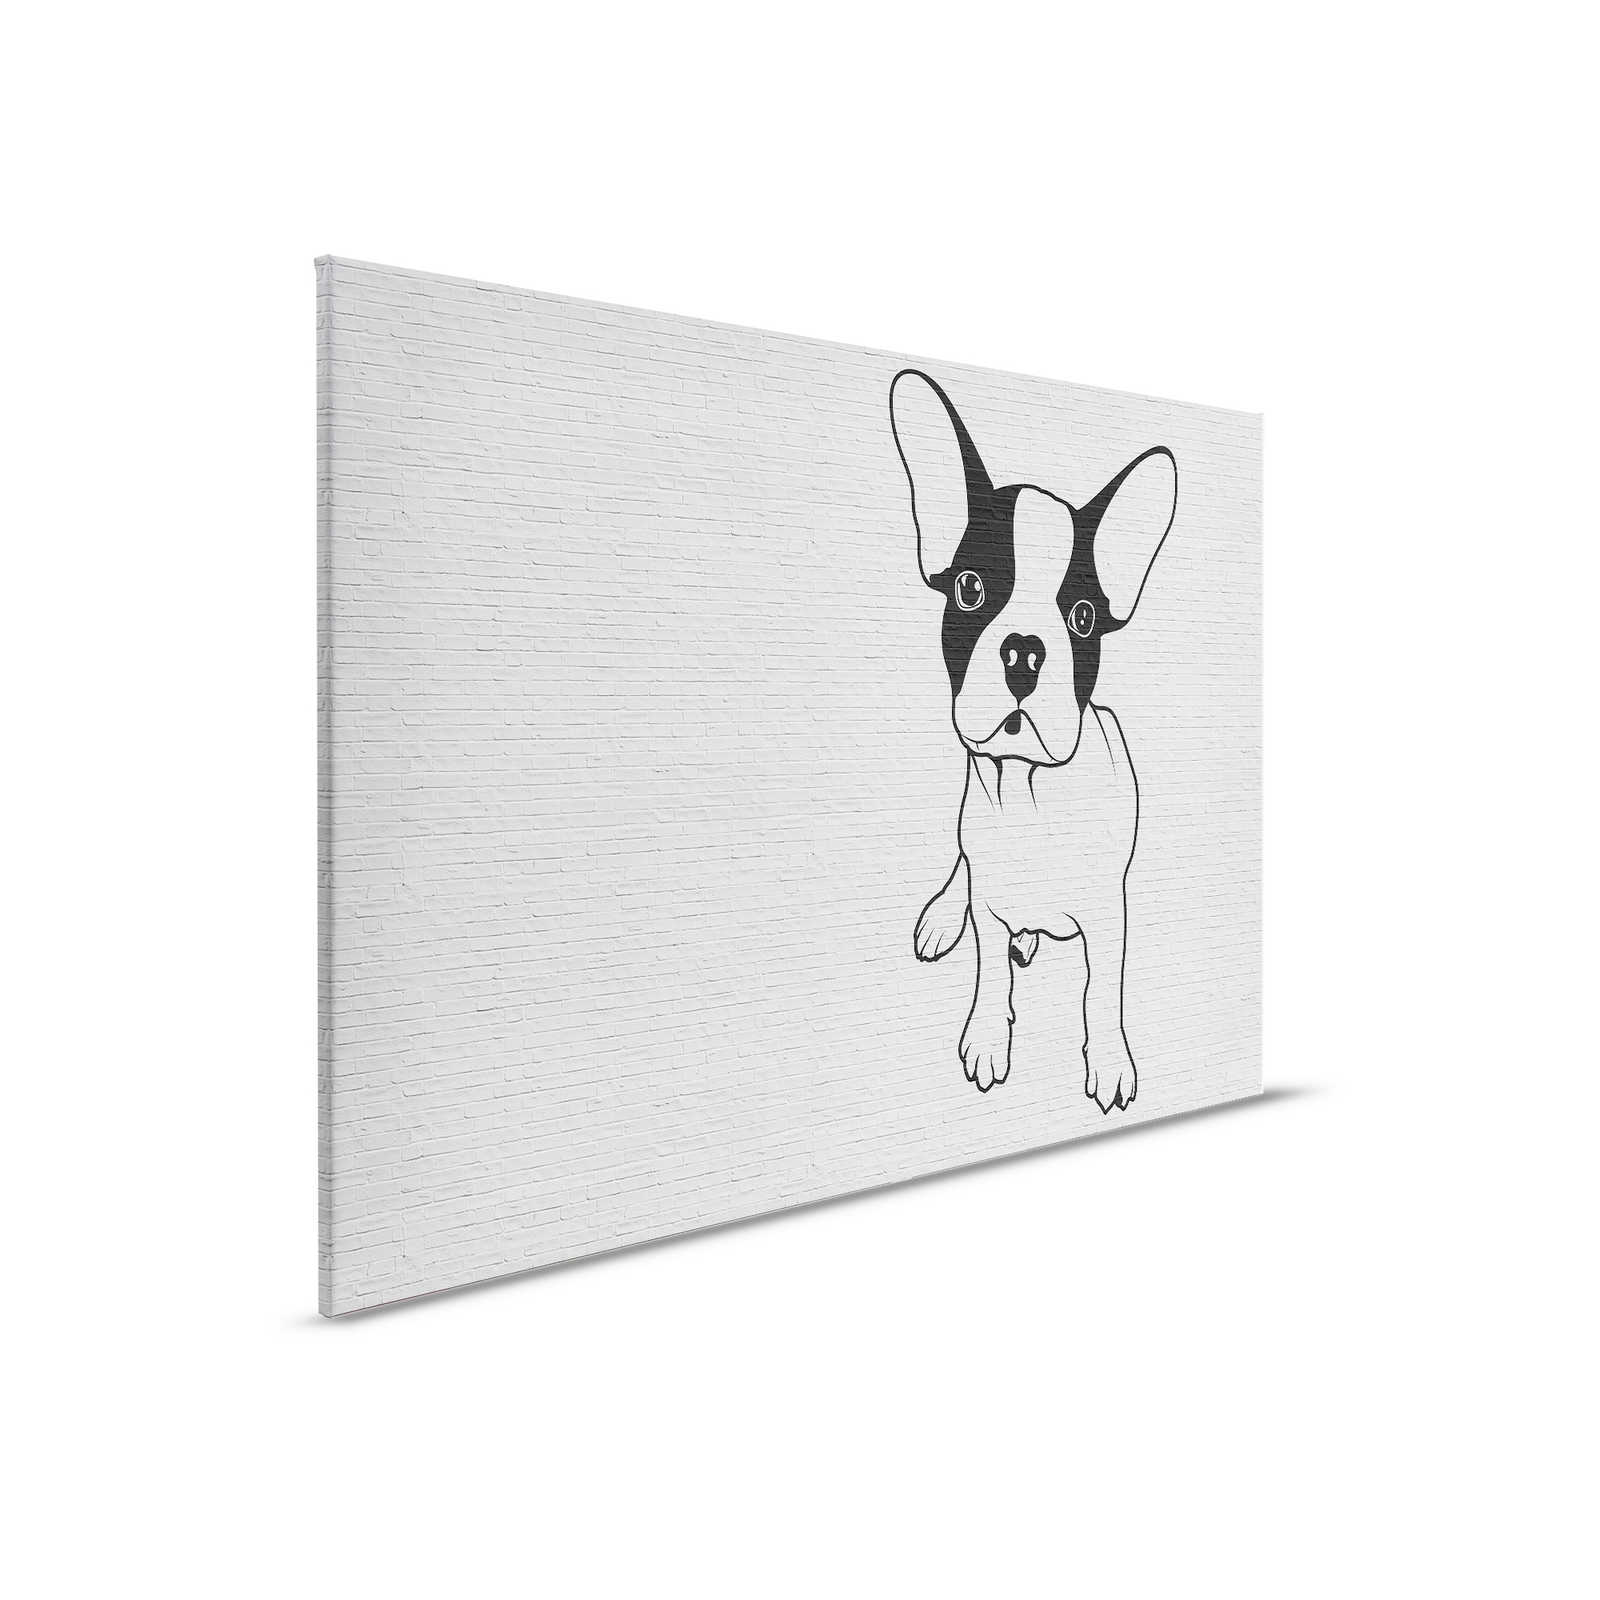         Tattoo you 2 - Canvas painting french bulldog, black and white - 0,90 m x 0,60 m
    